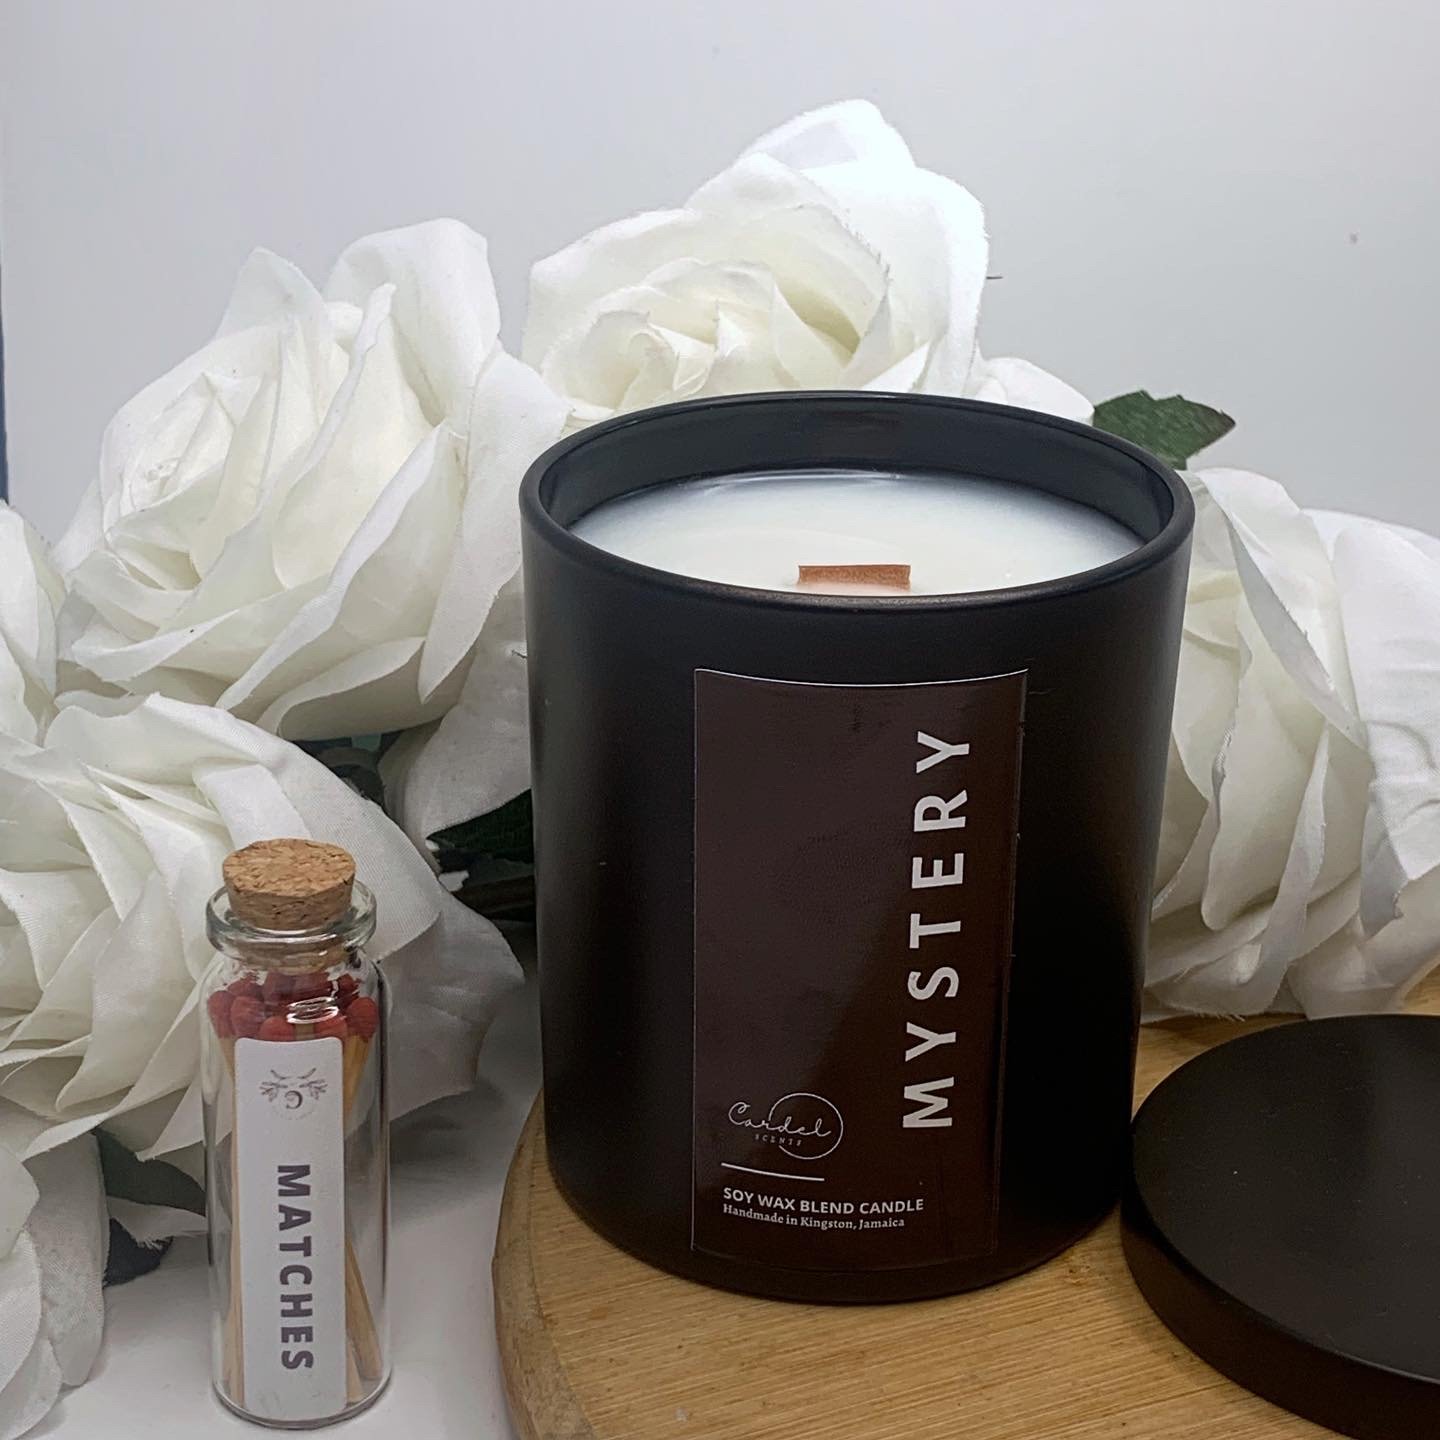 Mystery soy wax blend candle